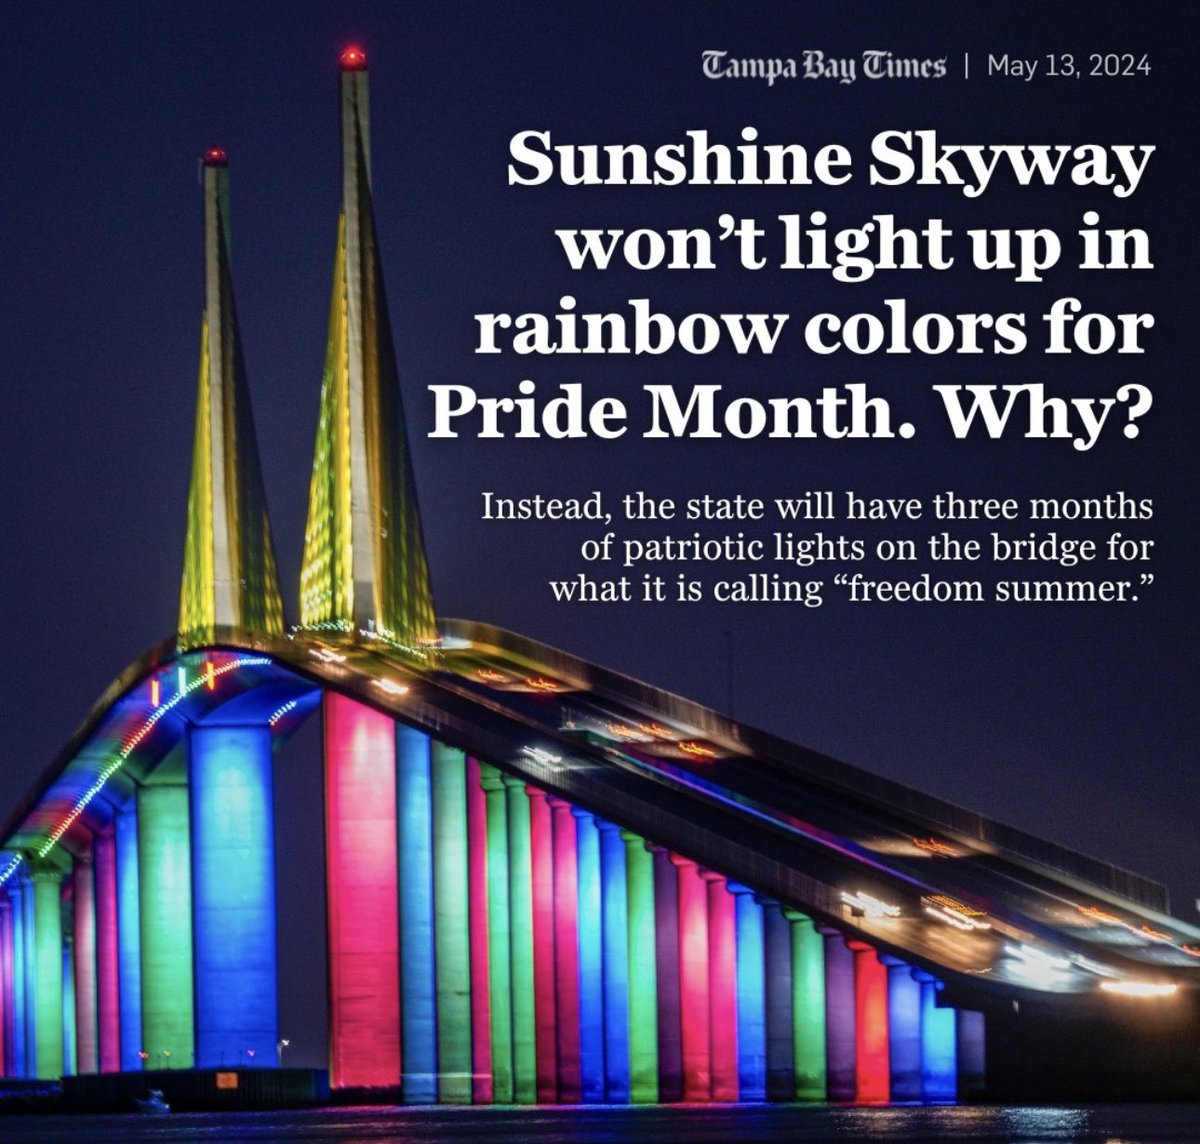 Florida announces that all bridges across the state will no longer flash rainbow colors in June for LGBT pride

Instead they’ll flash red, white, and blue to celebrate “Freedom Summer”

These colors are from a flag that unites us all as Americans, instead of dividing us

VICTORY!